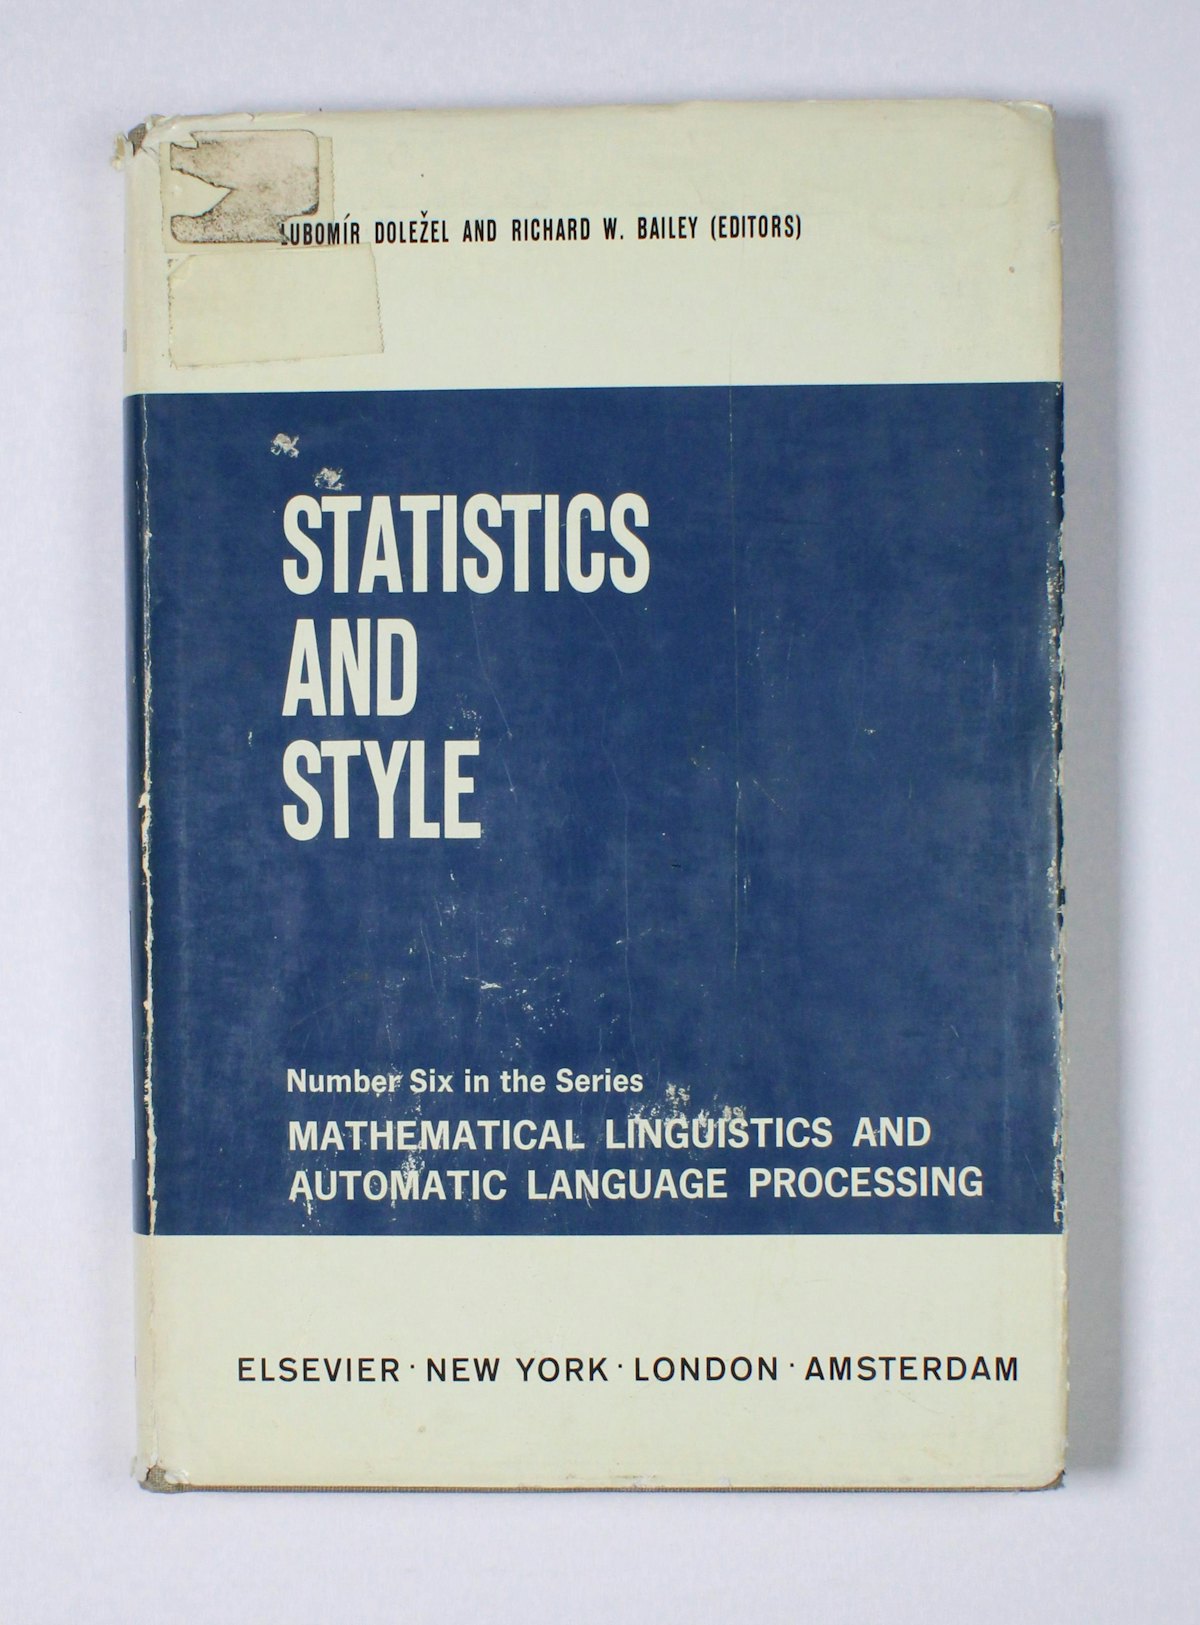 Statistics and Style